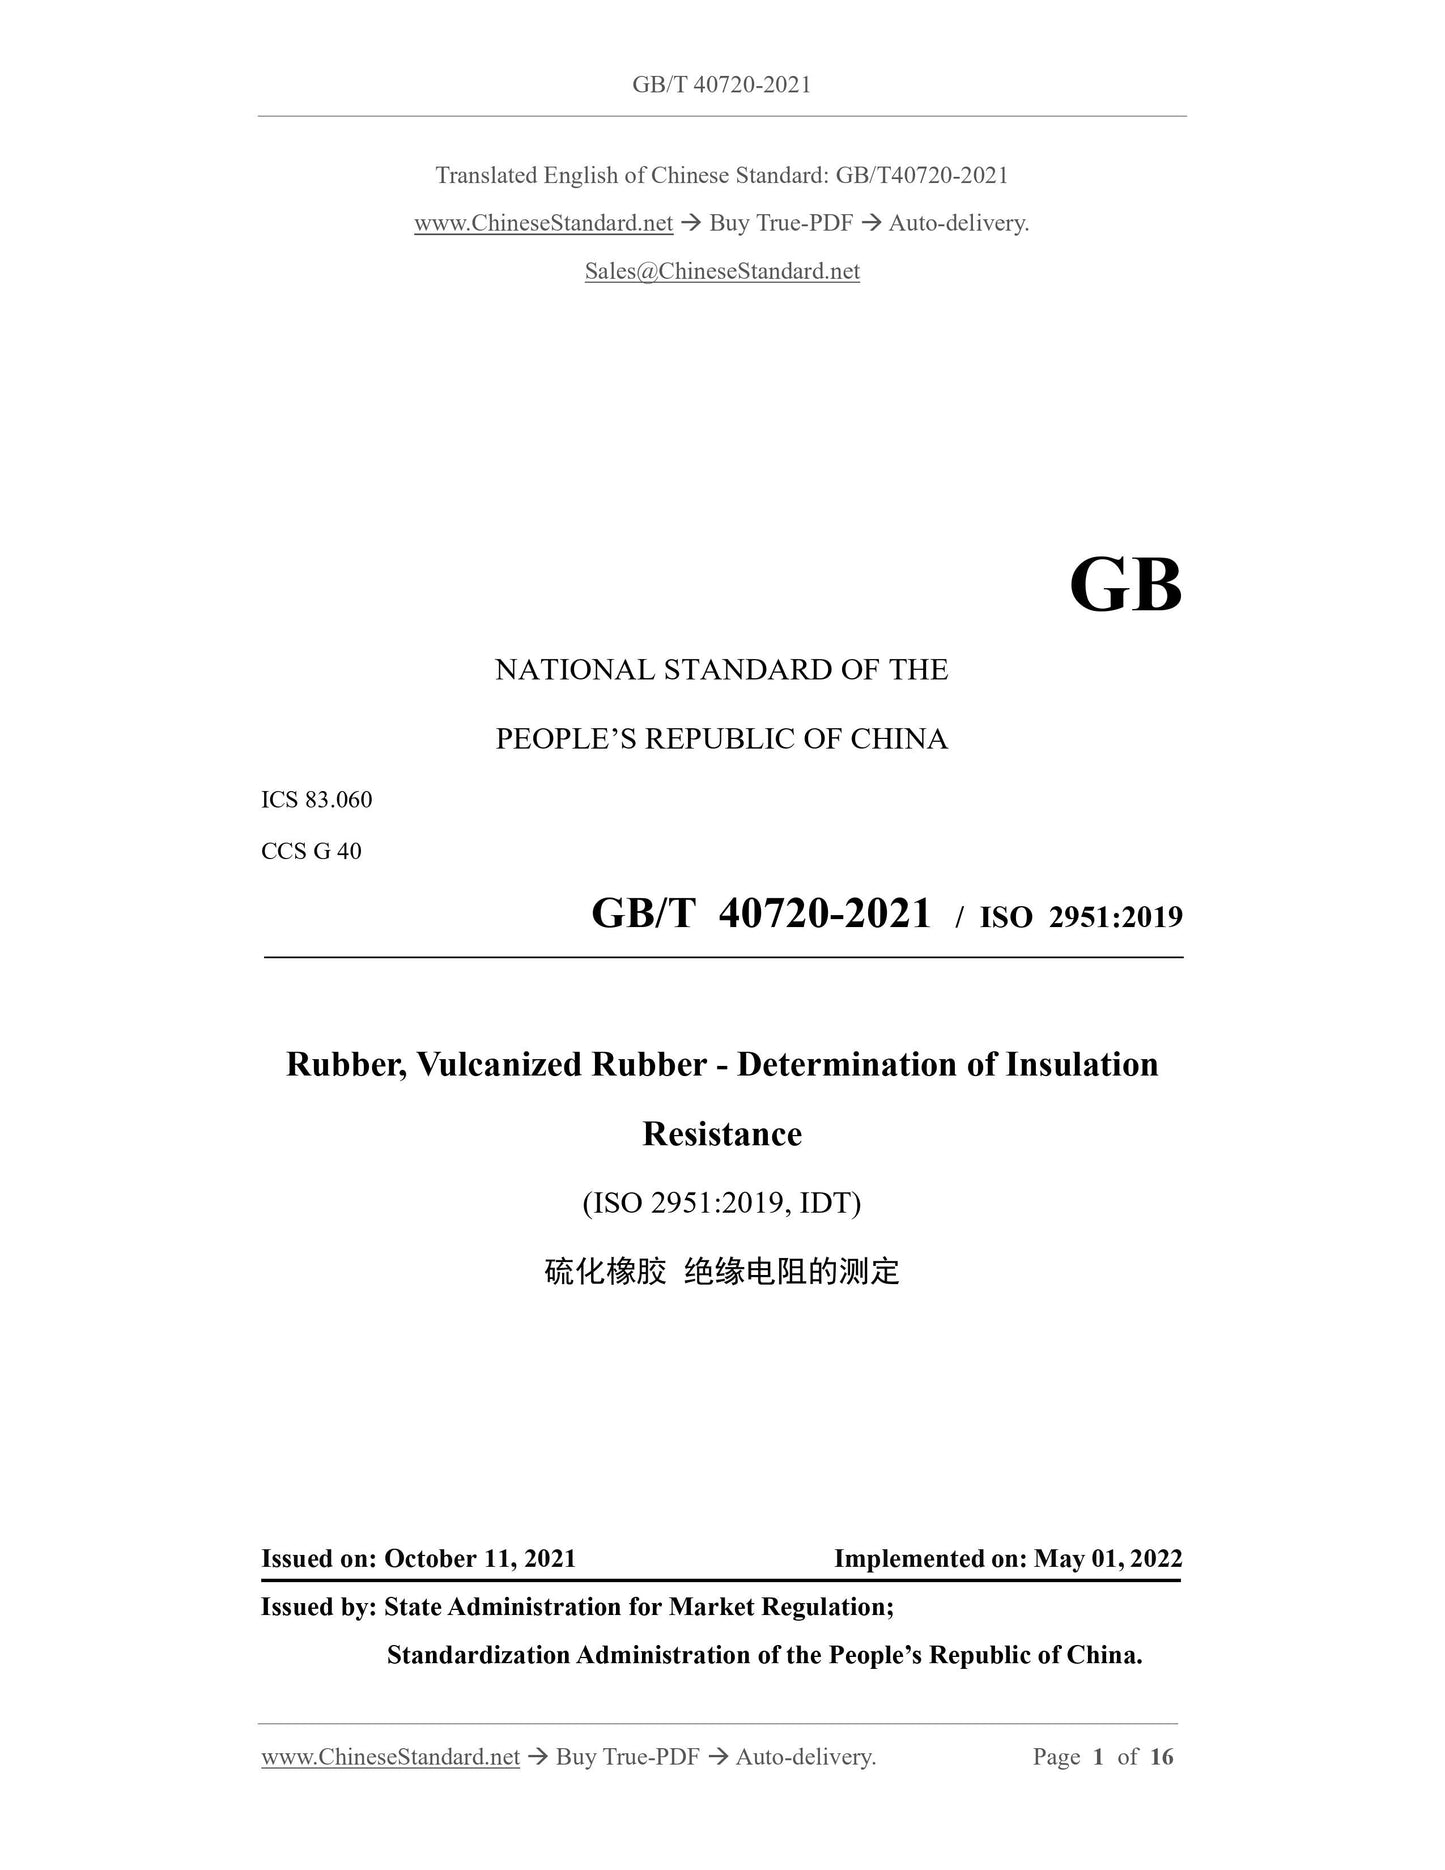 GB/T 40720-2021 Page 1